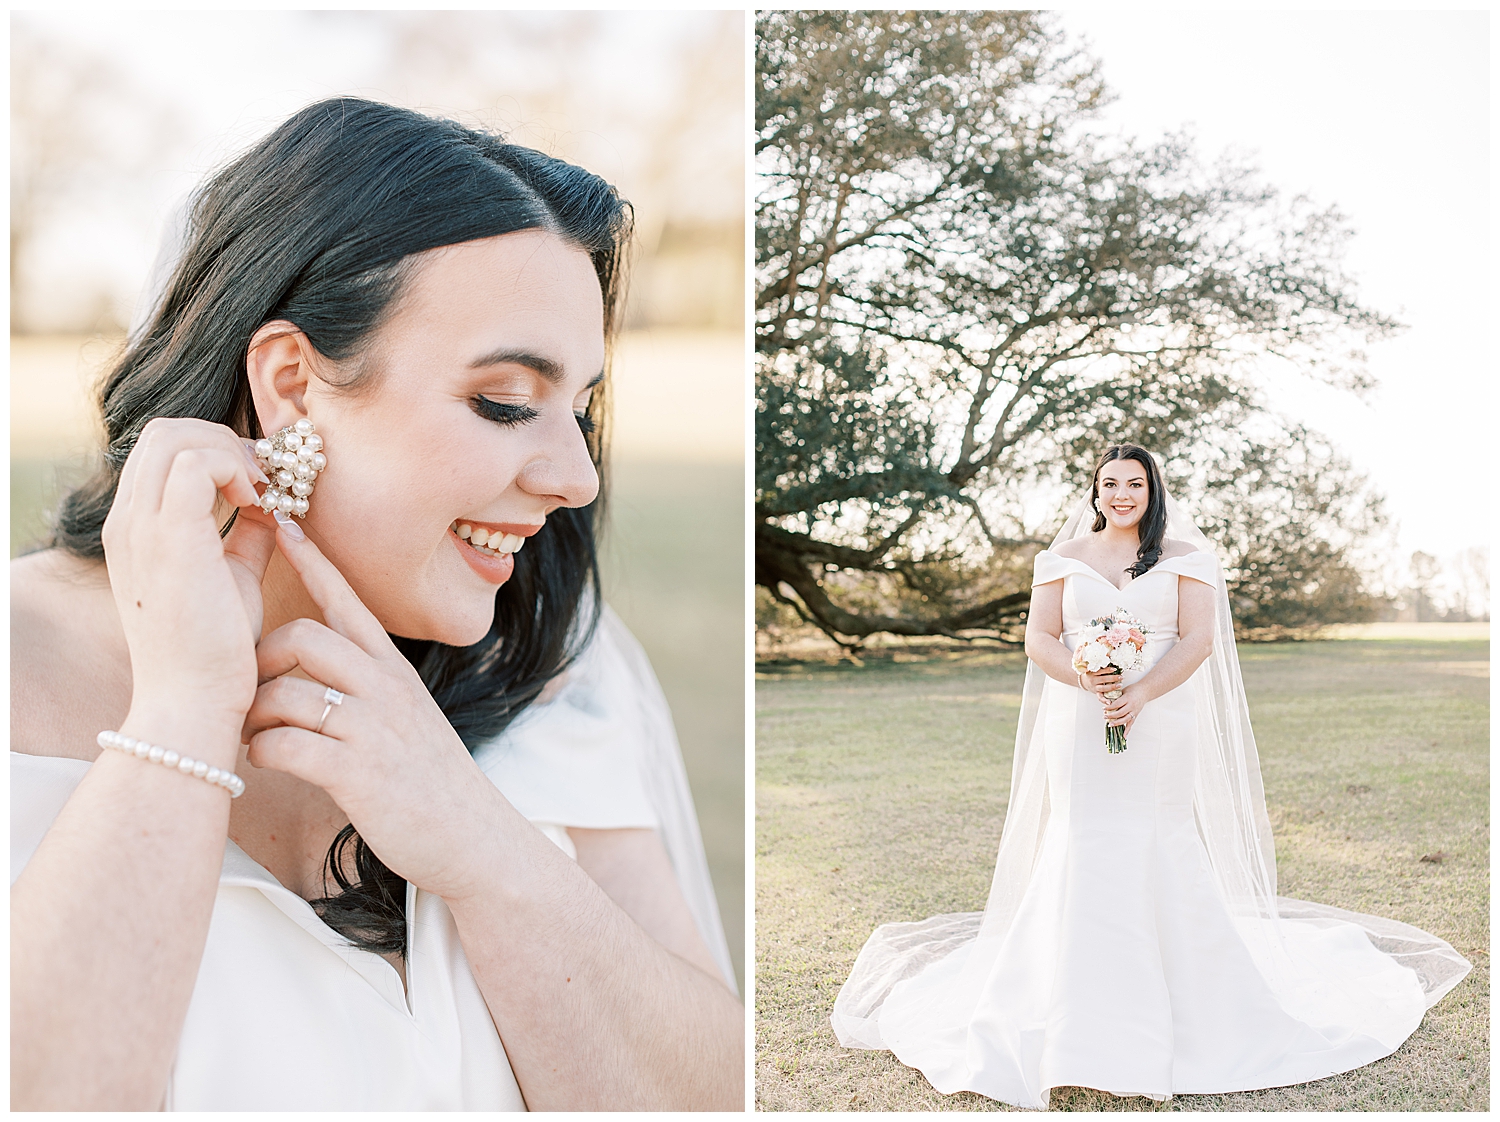 A bride puts on her cluster of pearls earrings.